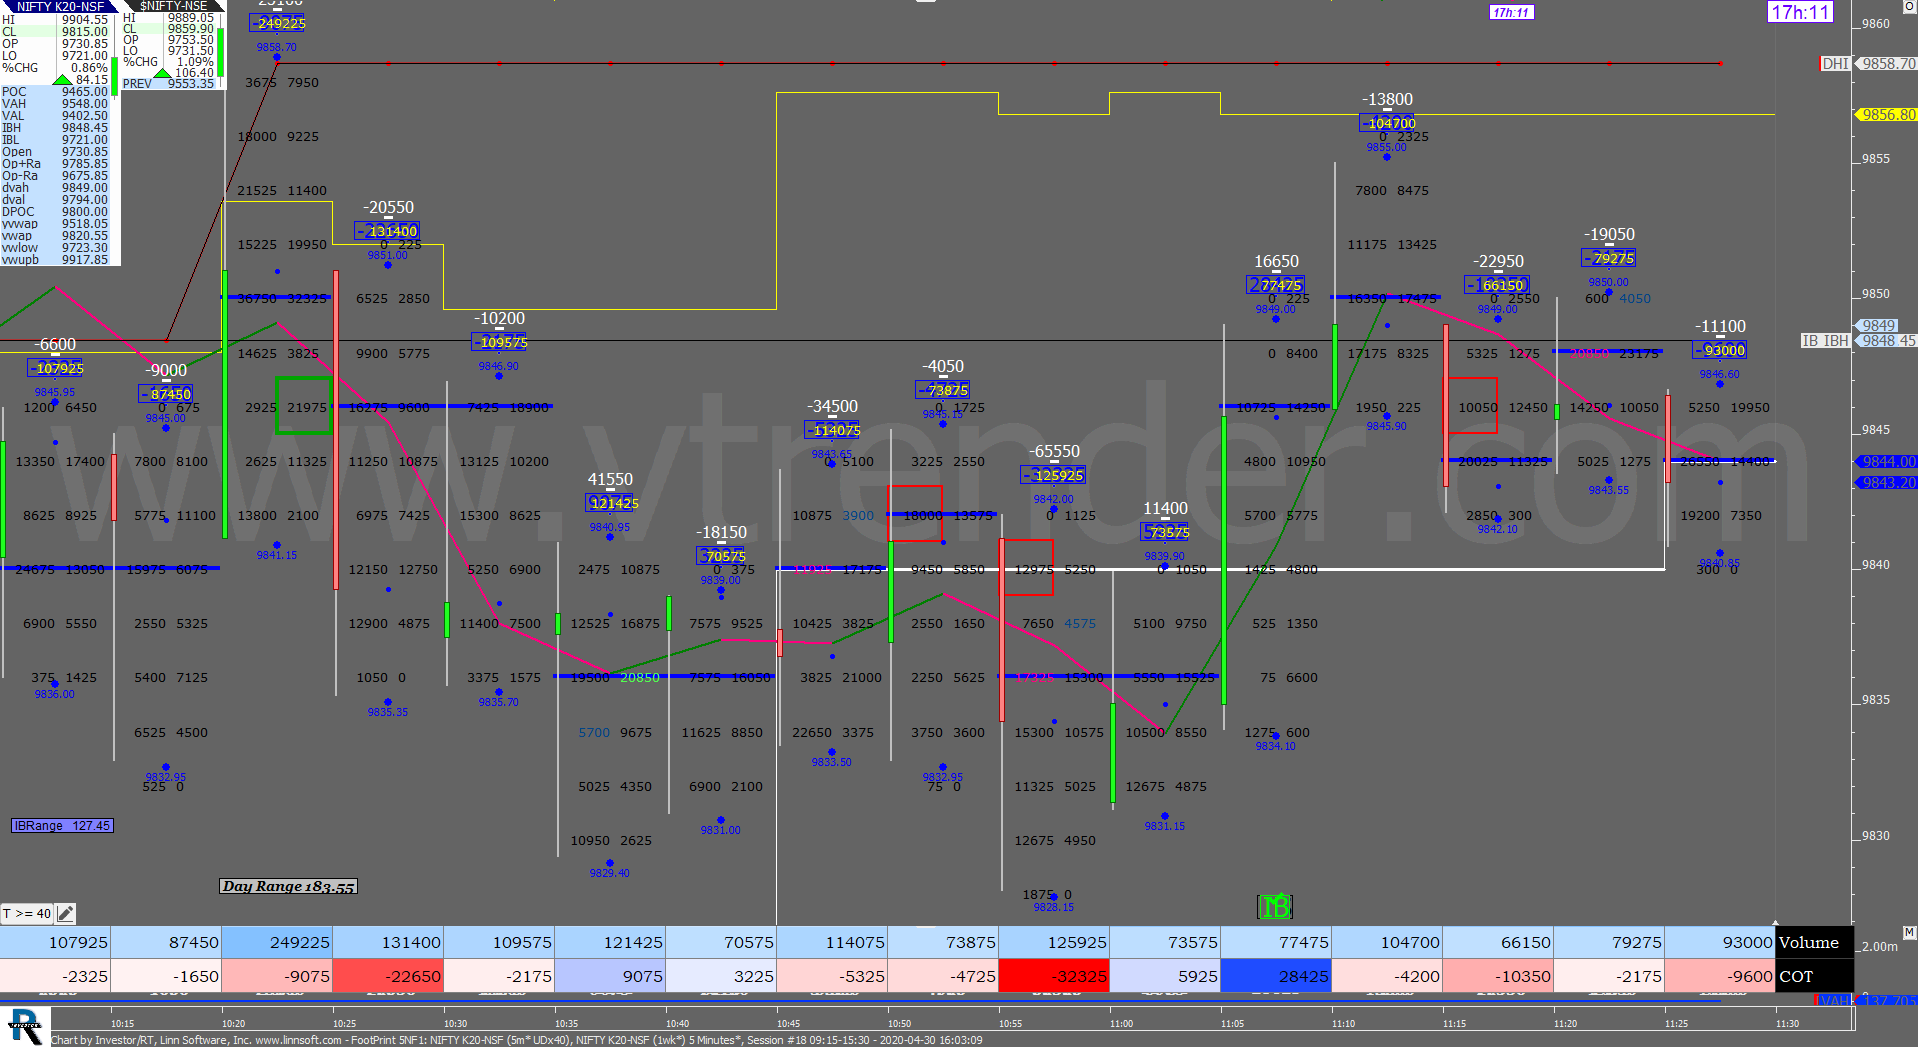 2 34 Order Flow Charts Dated 30Th Apr 2020 (5 Mins) Banknifty Futures, Day Trading, Intraday Trading, Intraday Trading Strategies, Nifty Futures, Order Flow Analysis, Support And Resistance, Trading Strategies, Volume Profile Trading